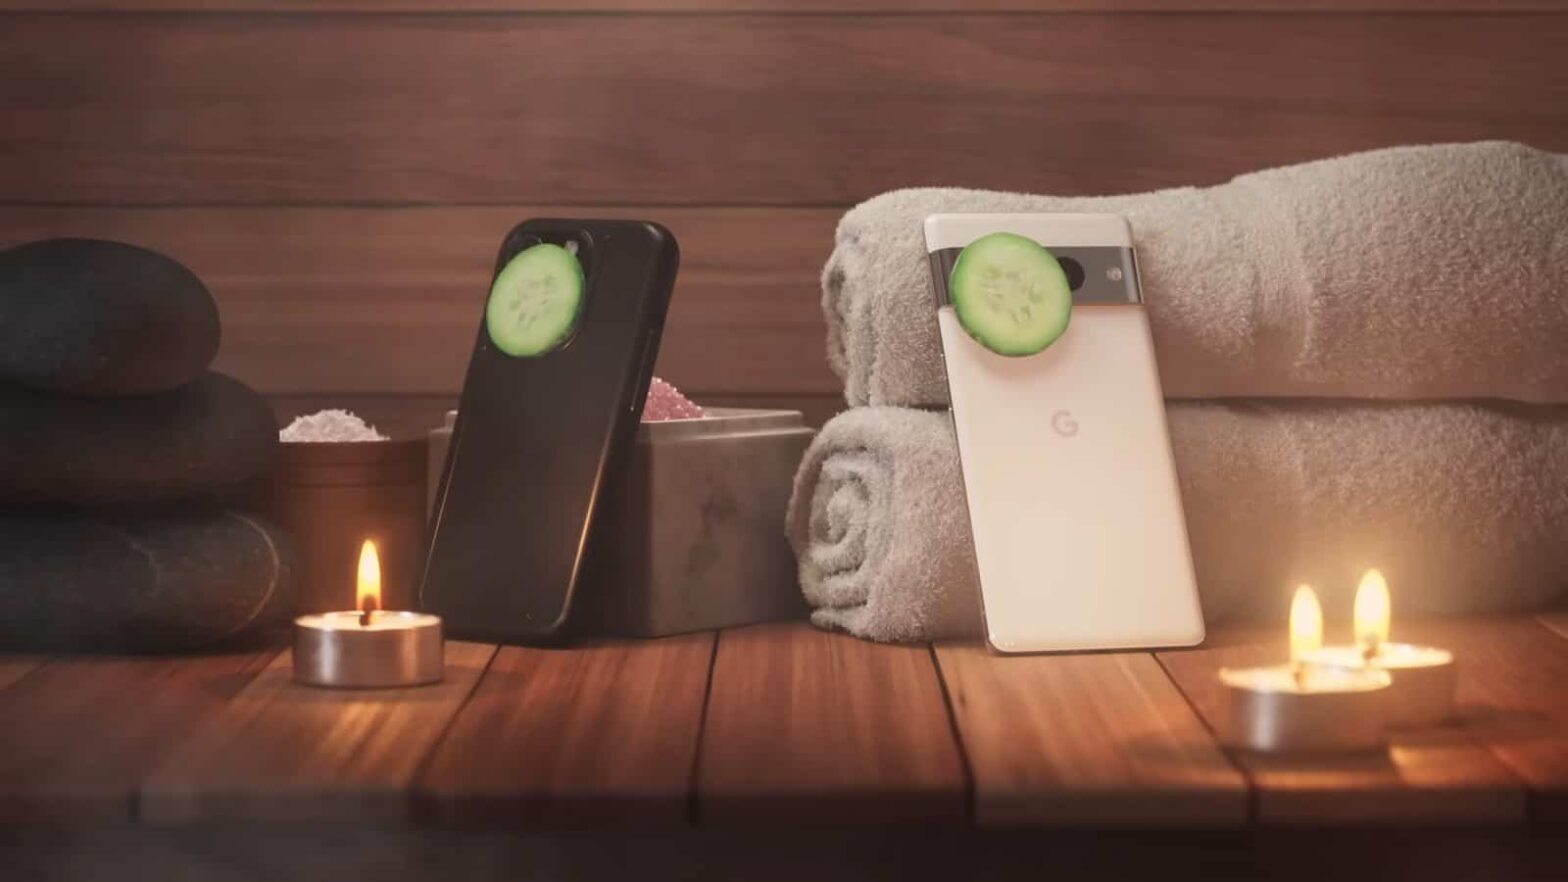 iPhone & Pixel enjoy a spa day in Google's new ad